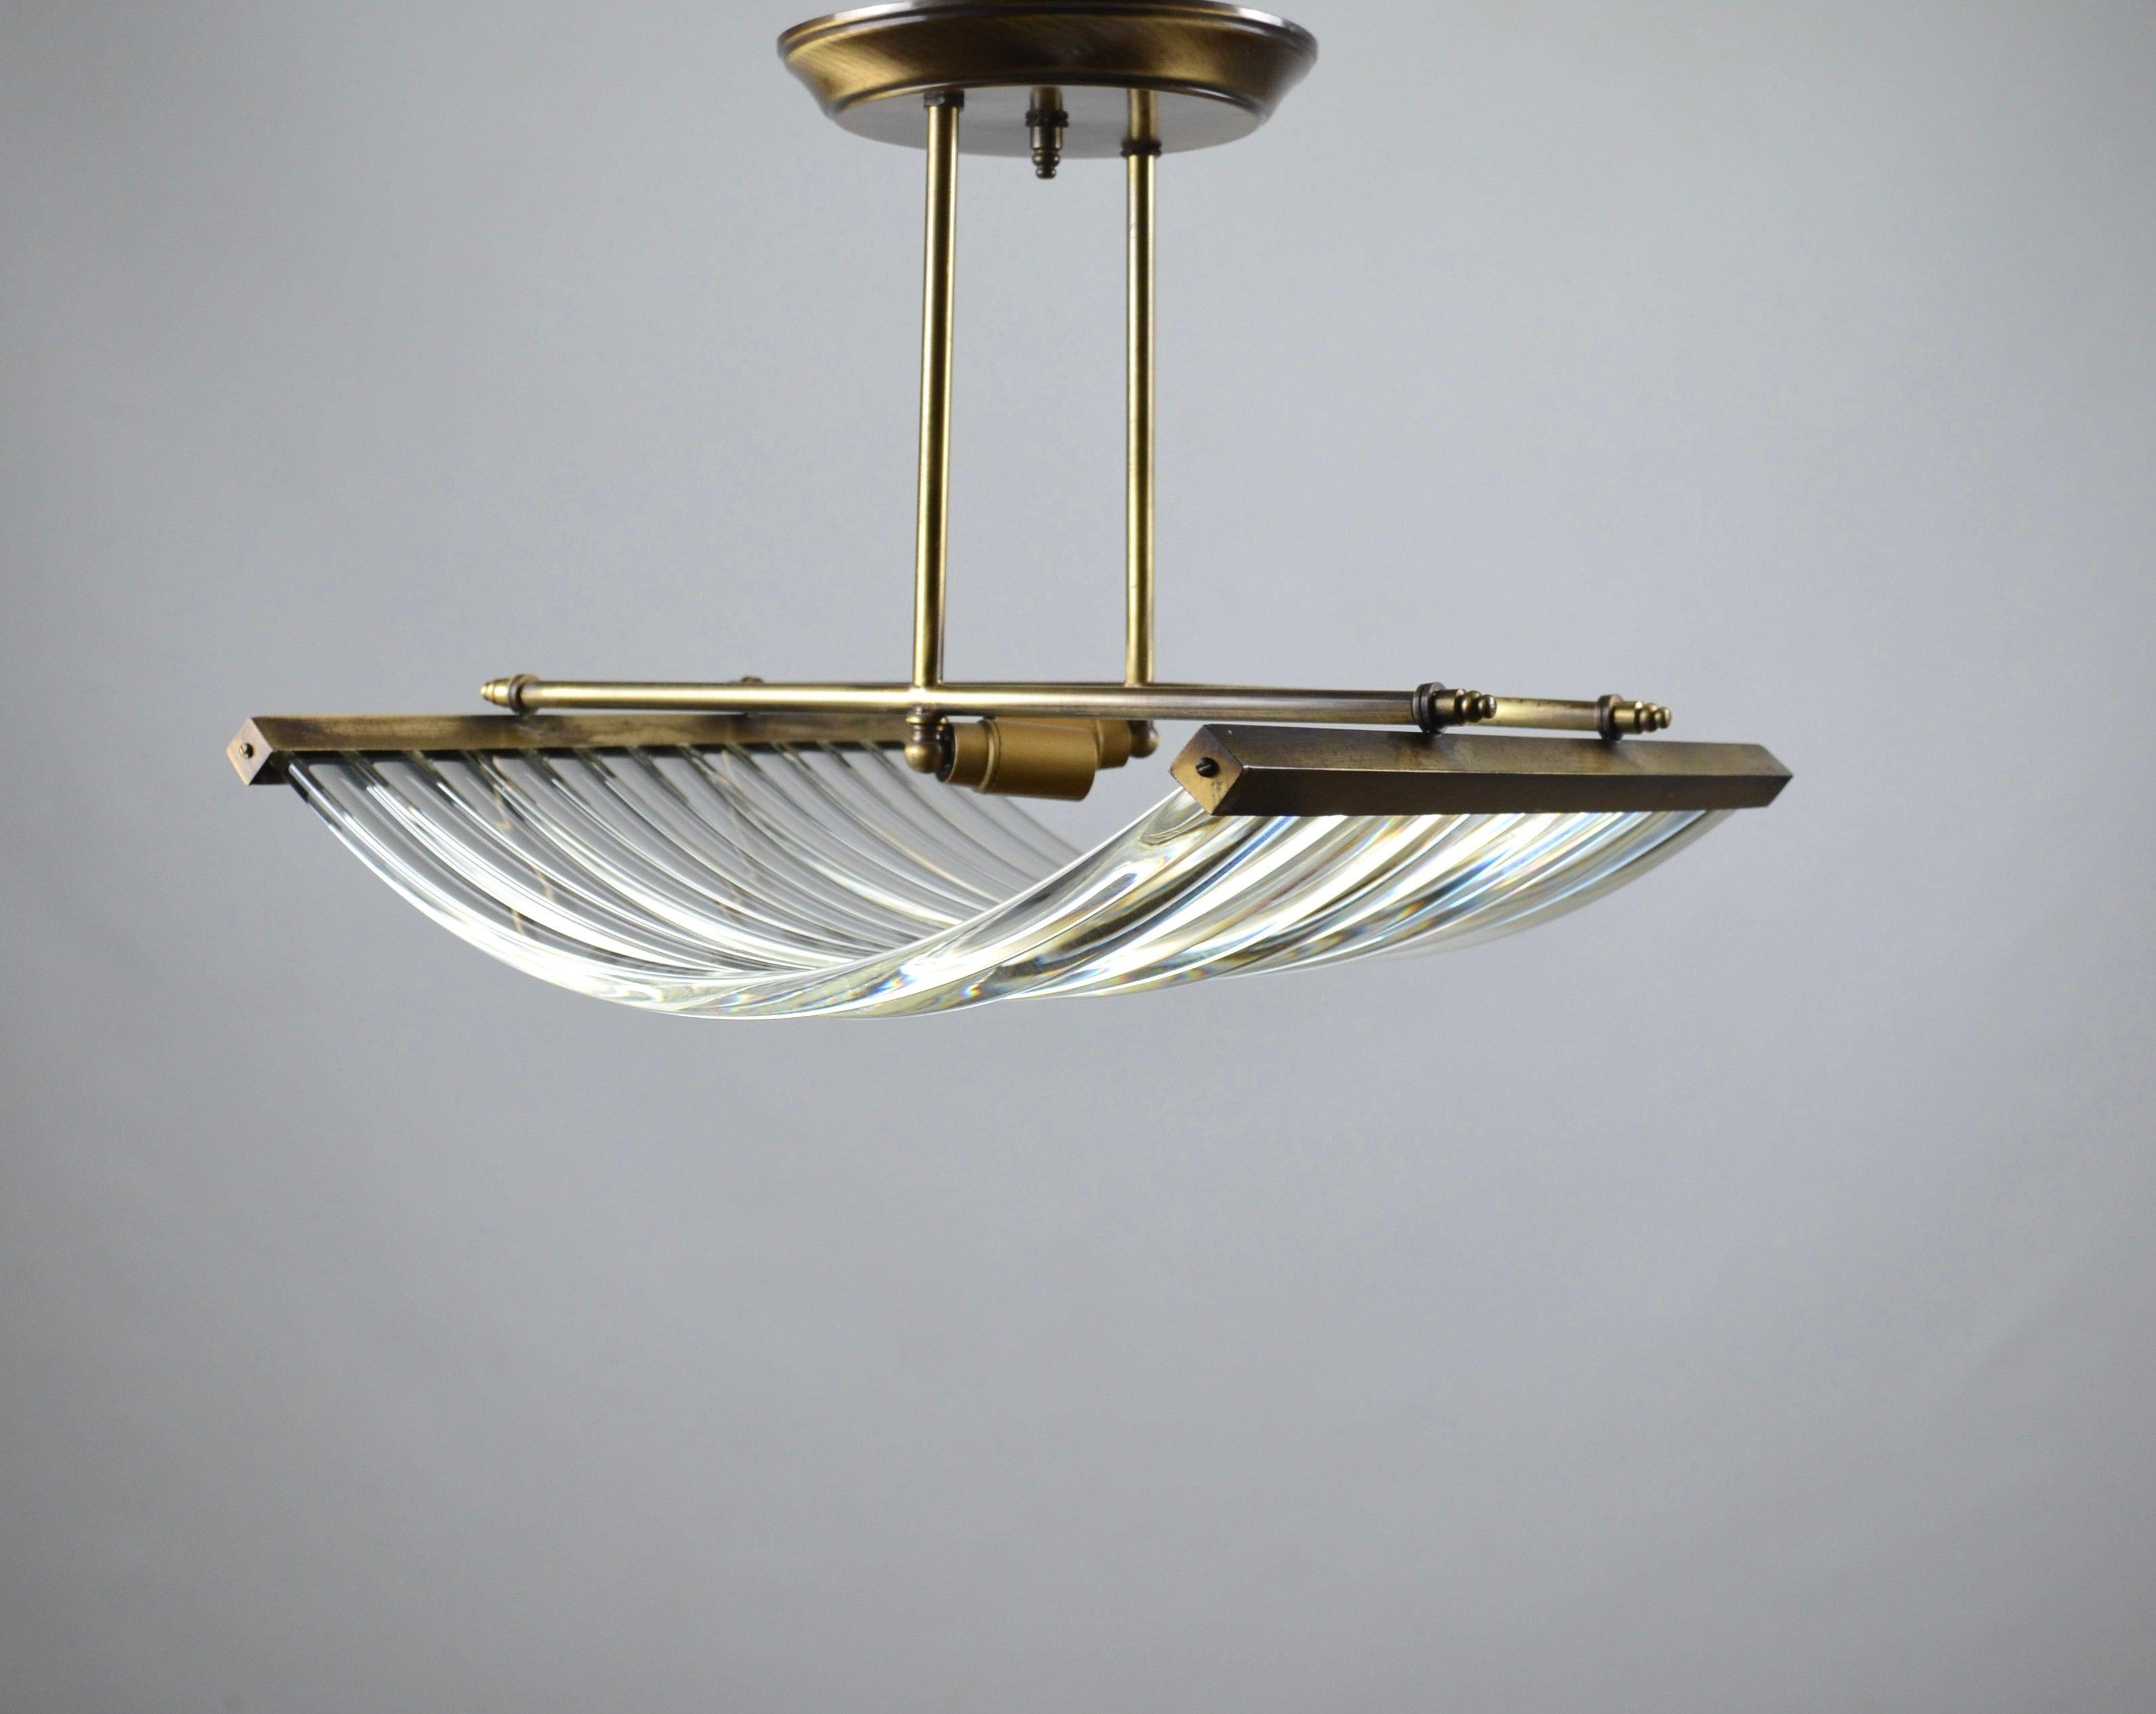 Rare suspension made by the Portuguese lamp designer, Antonio Da Piedade, in the 1970s.
It is composed of a brass structure and 13 manually curved translucent glass bars. Very elegant.